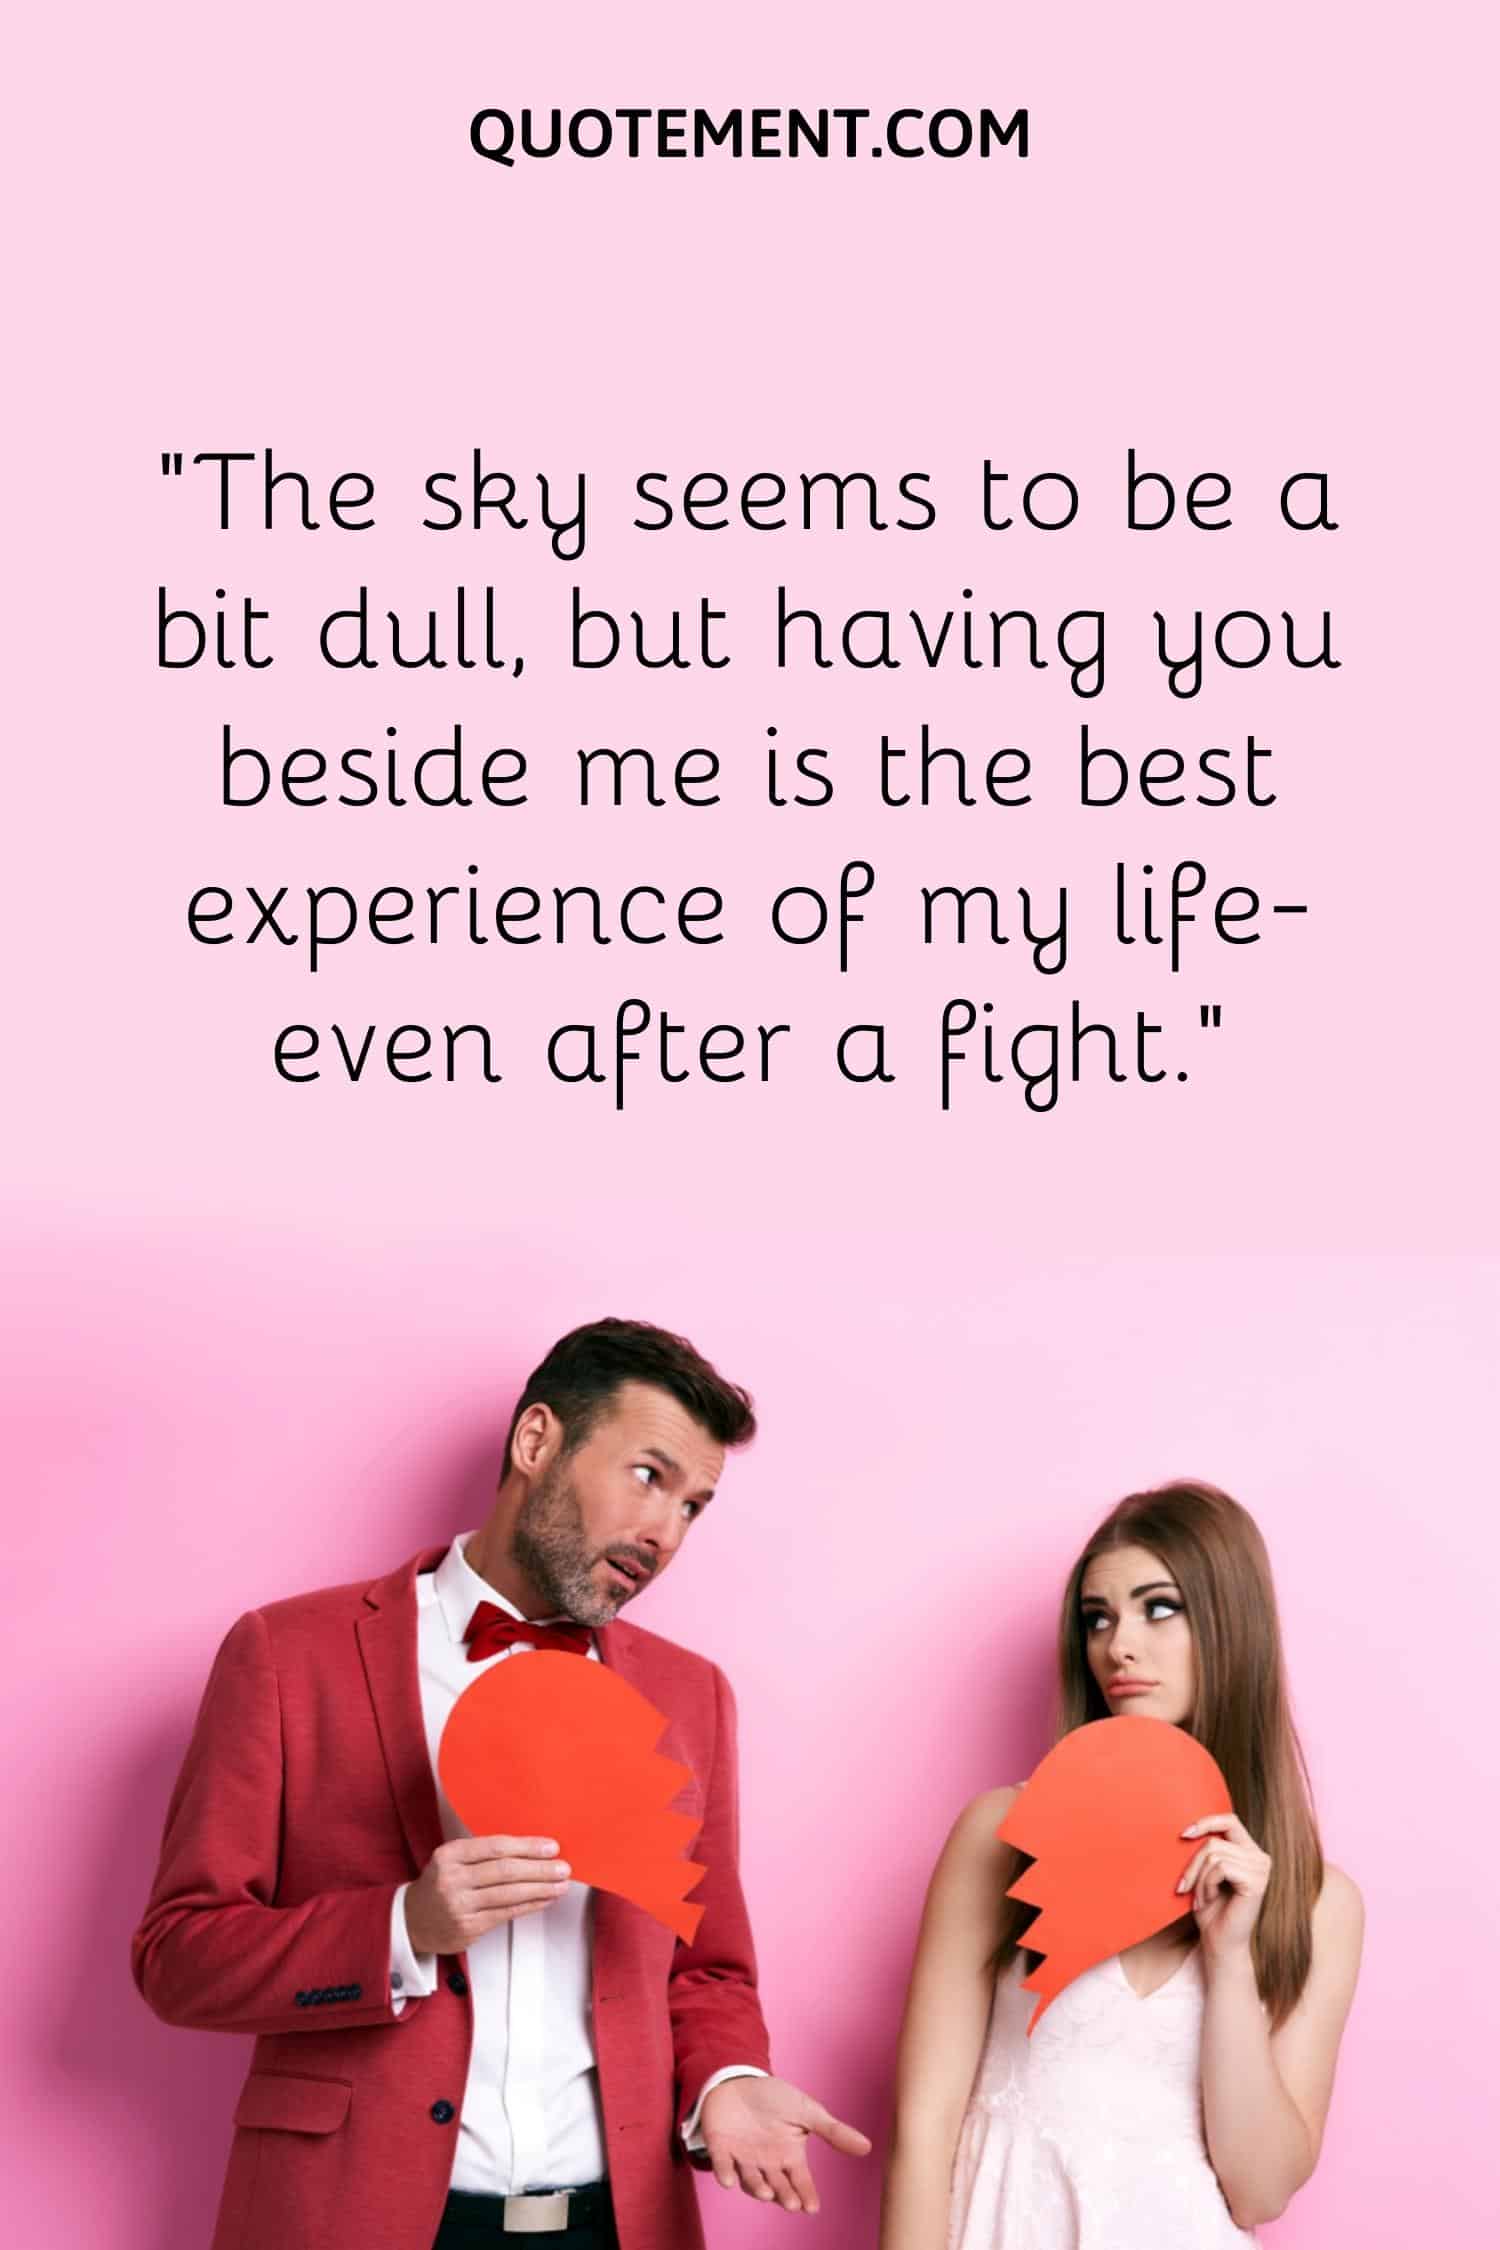 “The sky seems to be a bit dull, but having you beside me is the best experience of my life-even after a fight.”